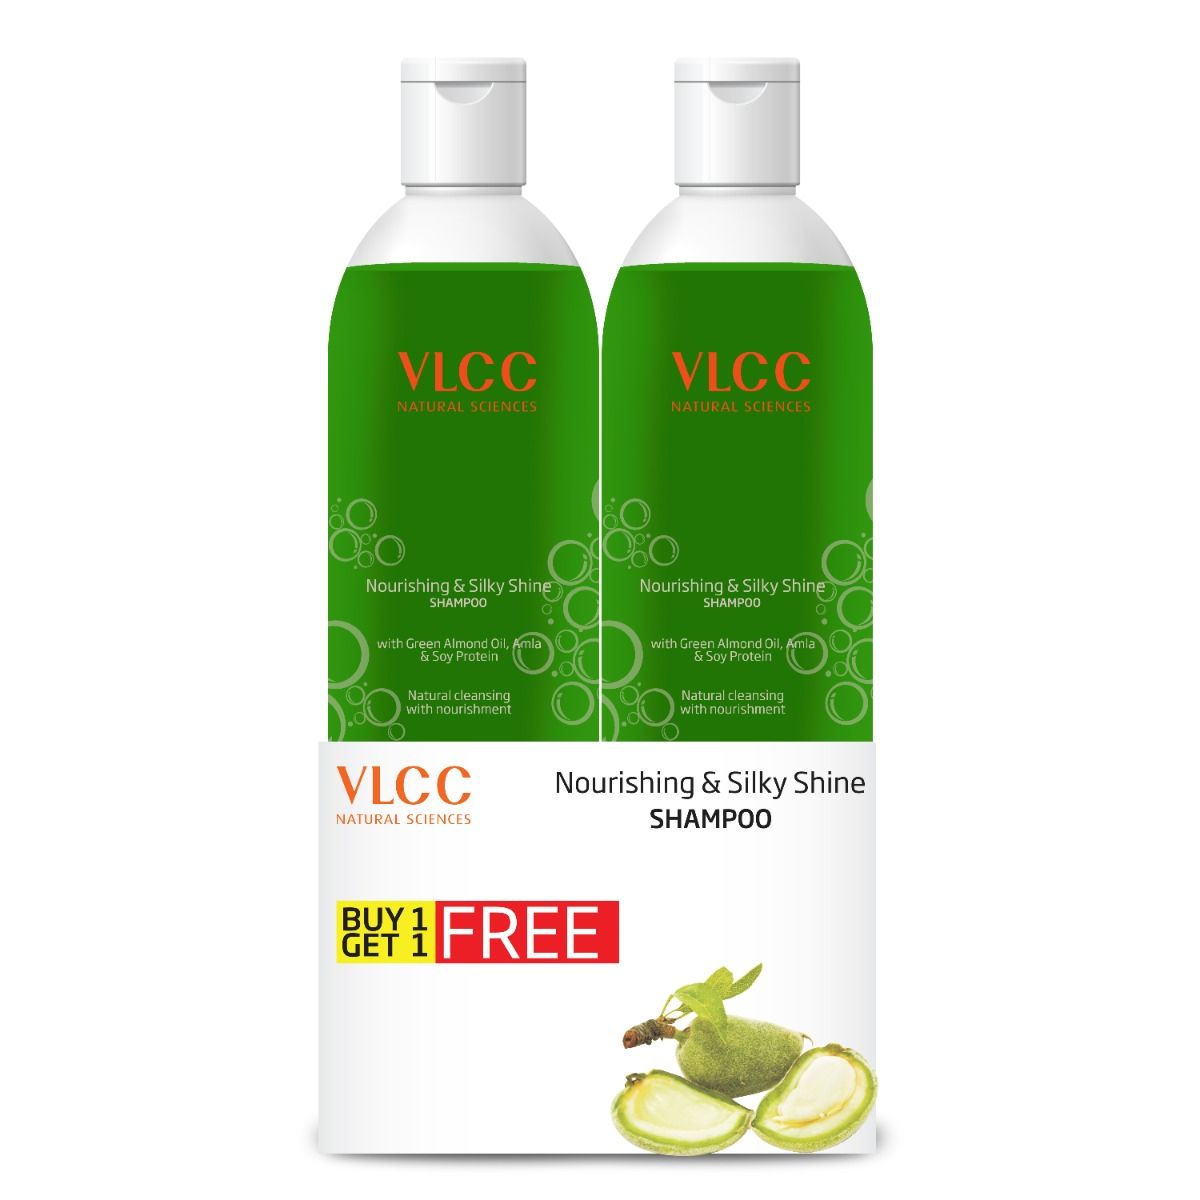 VLCC Hair Fall Control Shampoo 350 ml Buy 1 Get 1 Free Price Uses Side  Effects Composition  Apollo Pharmacy